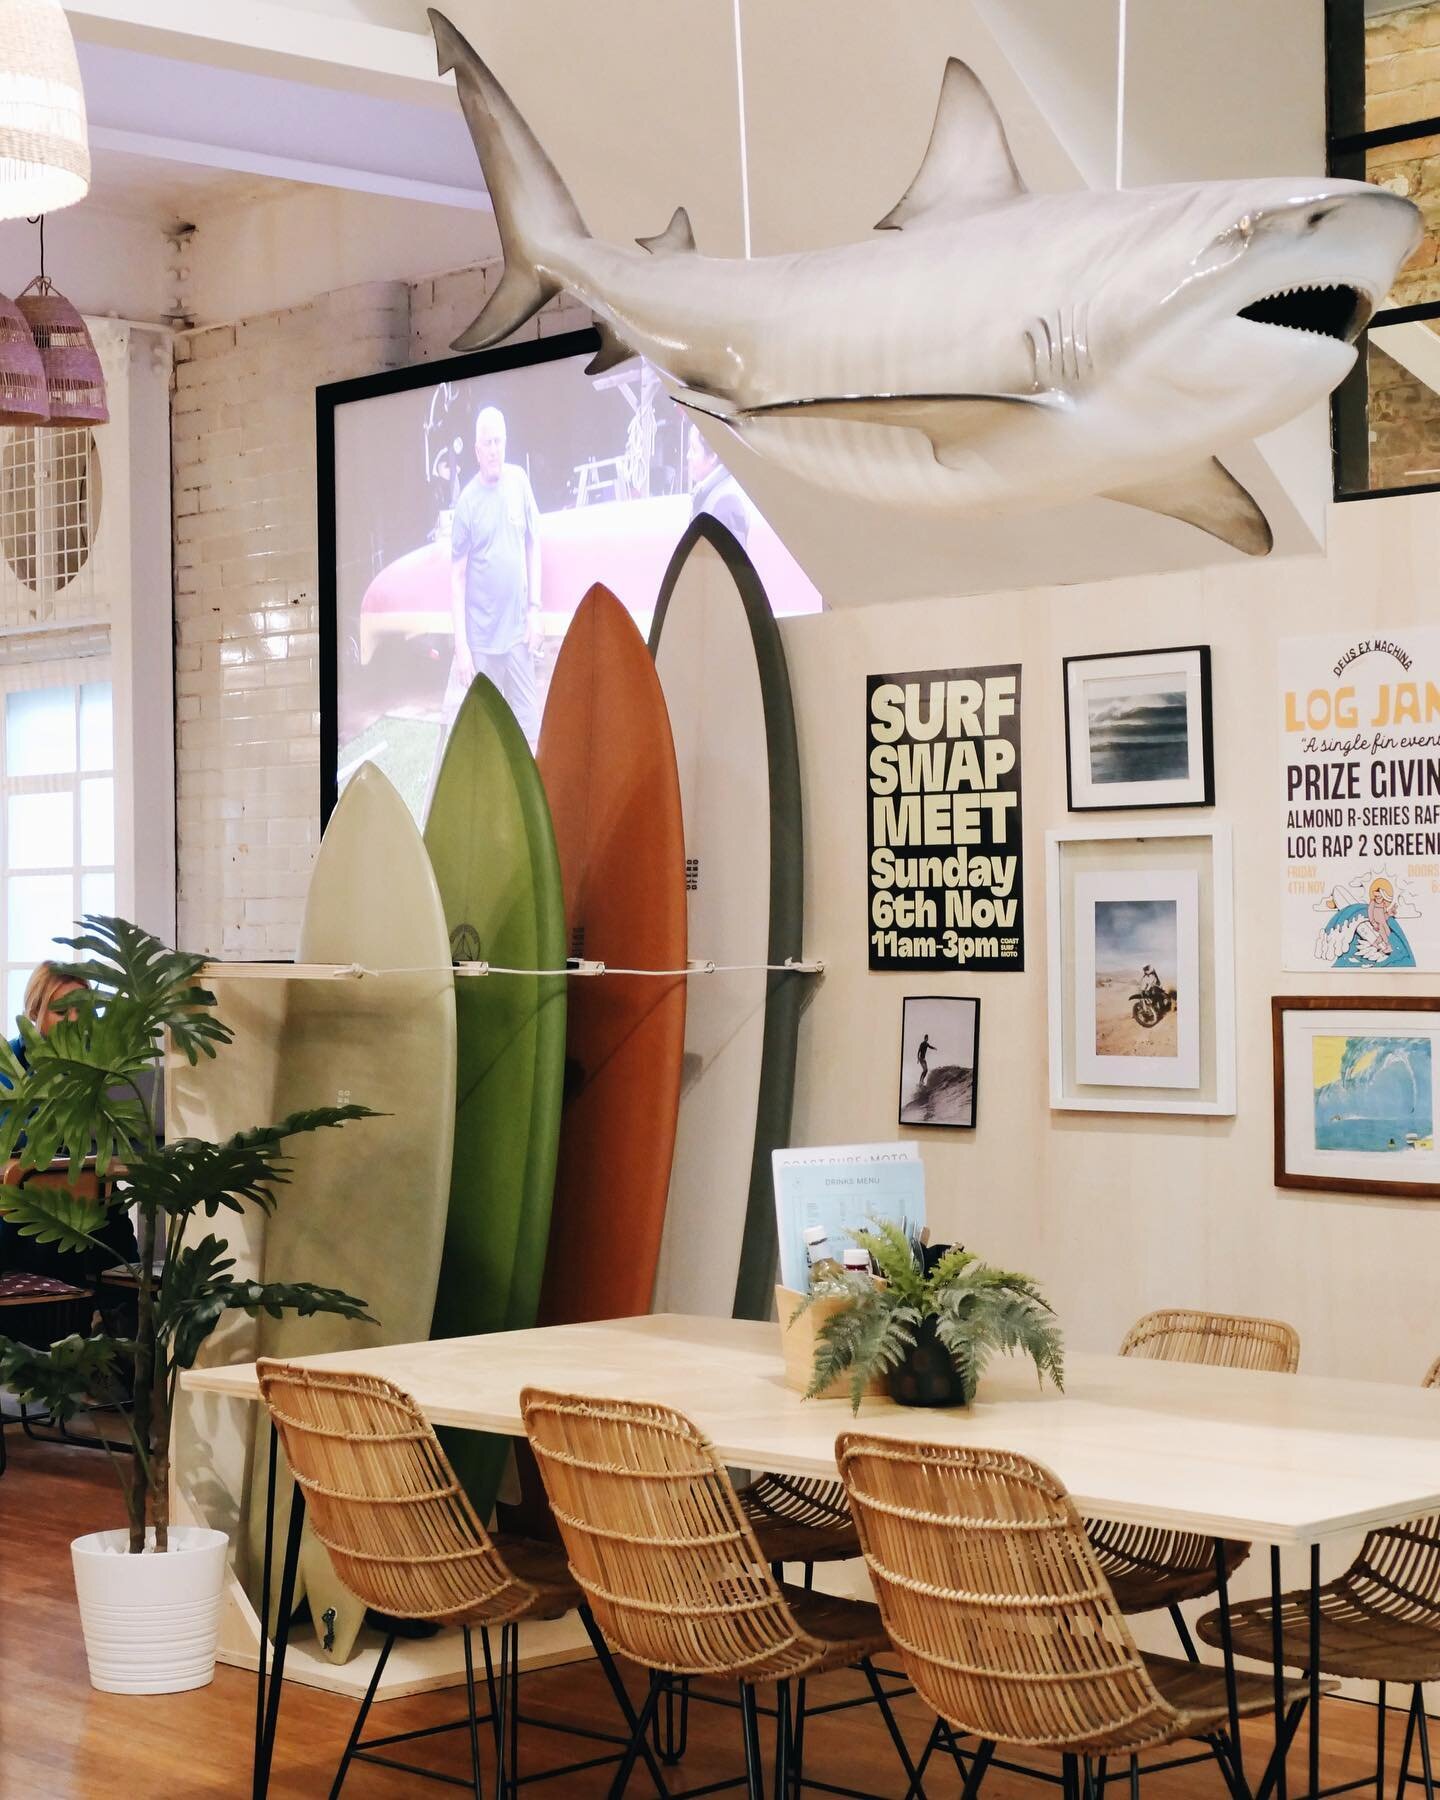 Fridays means checking in at Coast, helping to capture over 2000 posts for Instagram to date, and continuing creative support for all their branding requirements.

#wearecoast
#bydesk
#surfshop 
#surfcafe 
#contentstrategy 
#contentcreation 
#interio